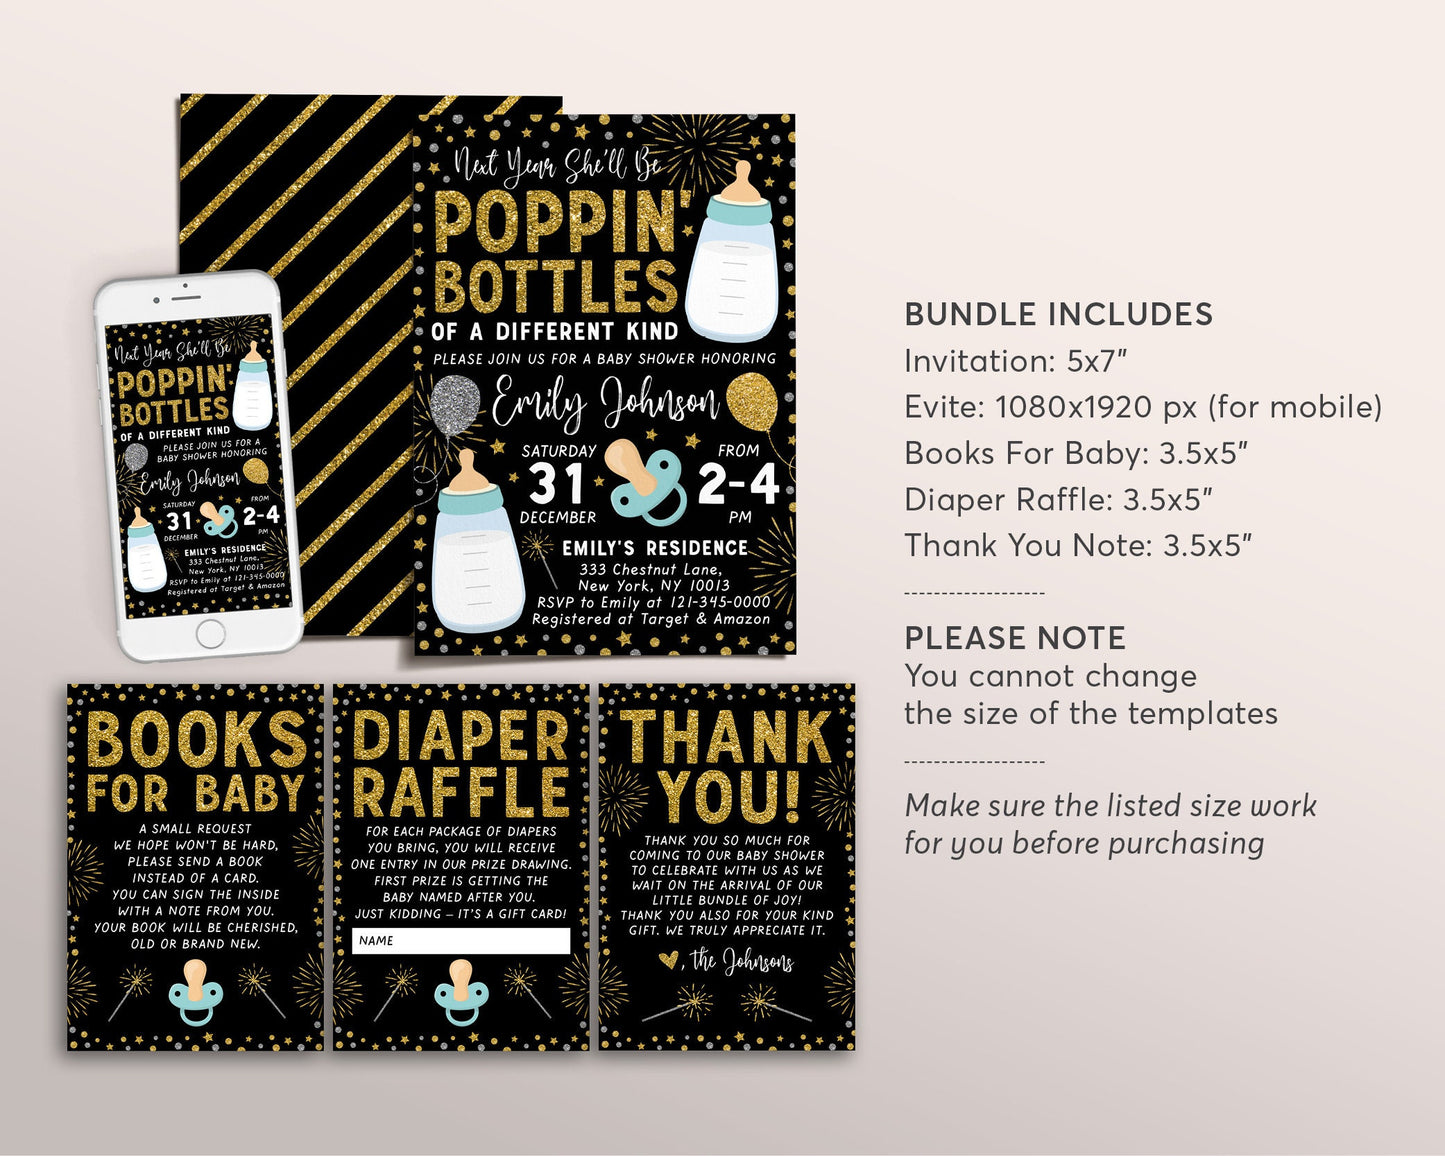 New Years BOY Baby Shower BUNDLE Invitation Suite Set Editable Template, Poppin Bottles Invite Books For Baby Diaper Raffle Thank You DIY